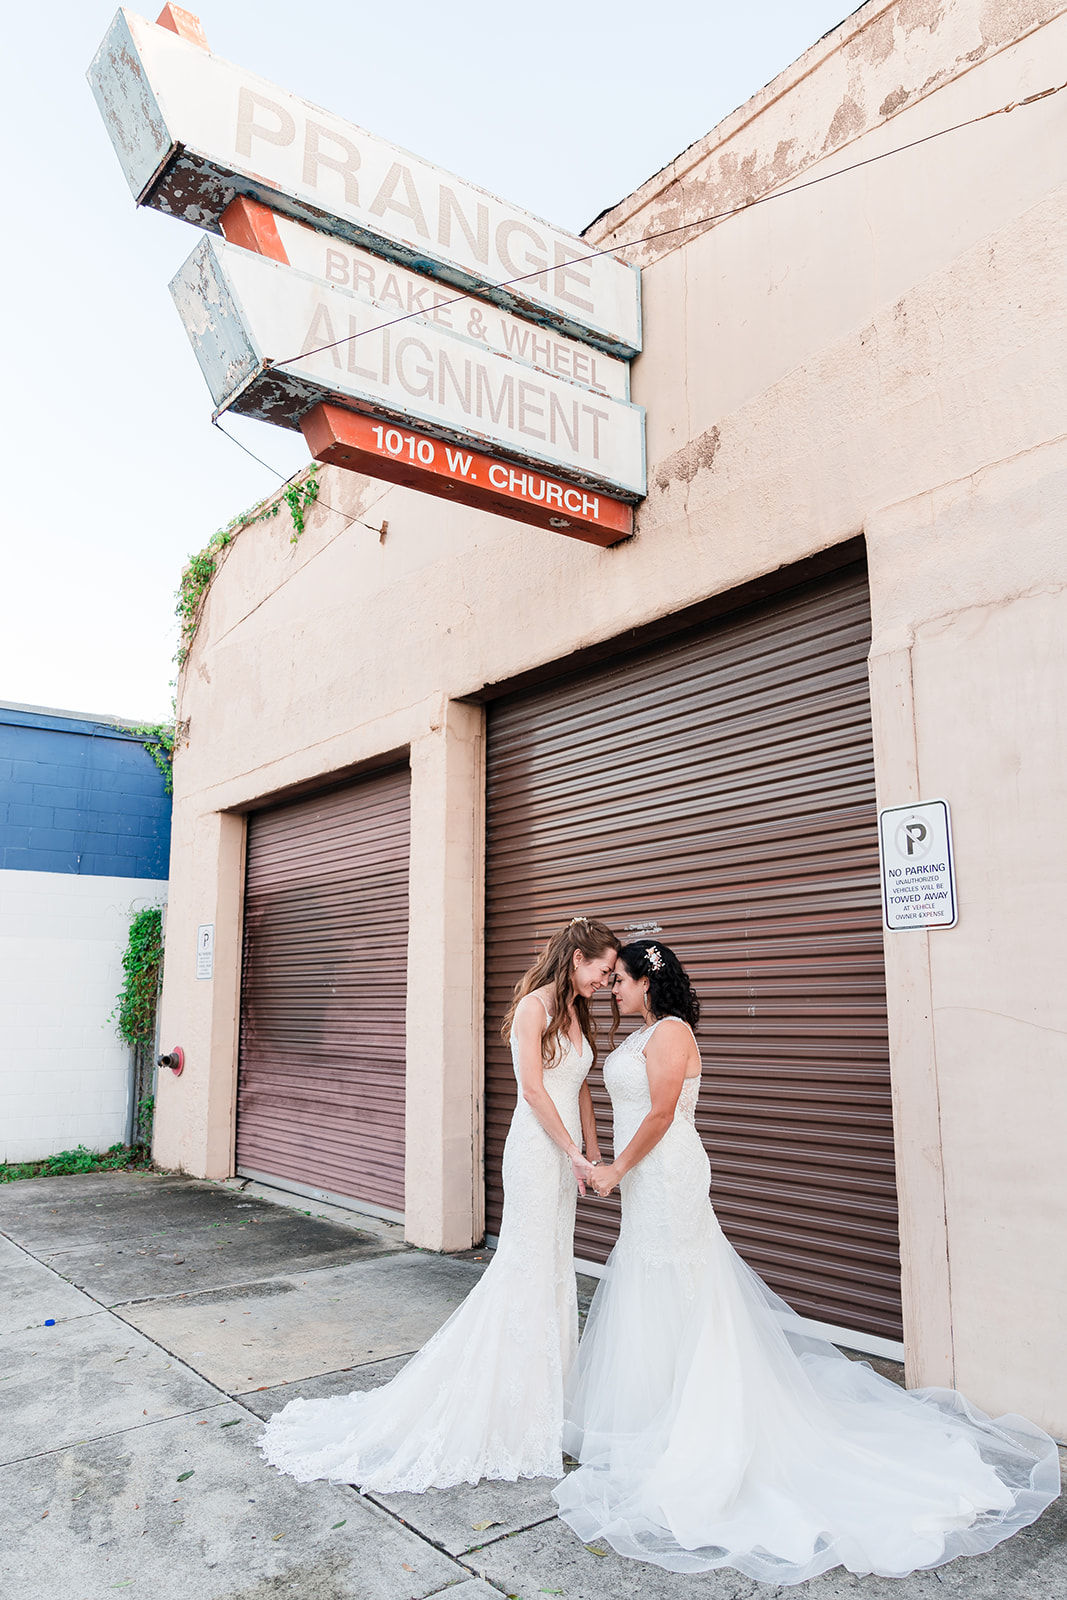 Two brides touch foreheads in front of Prange Brake and Wheel Alignment shop on Church Street in Downtown Orlando, Florida, capturing a deeply personal moment between the couple.